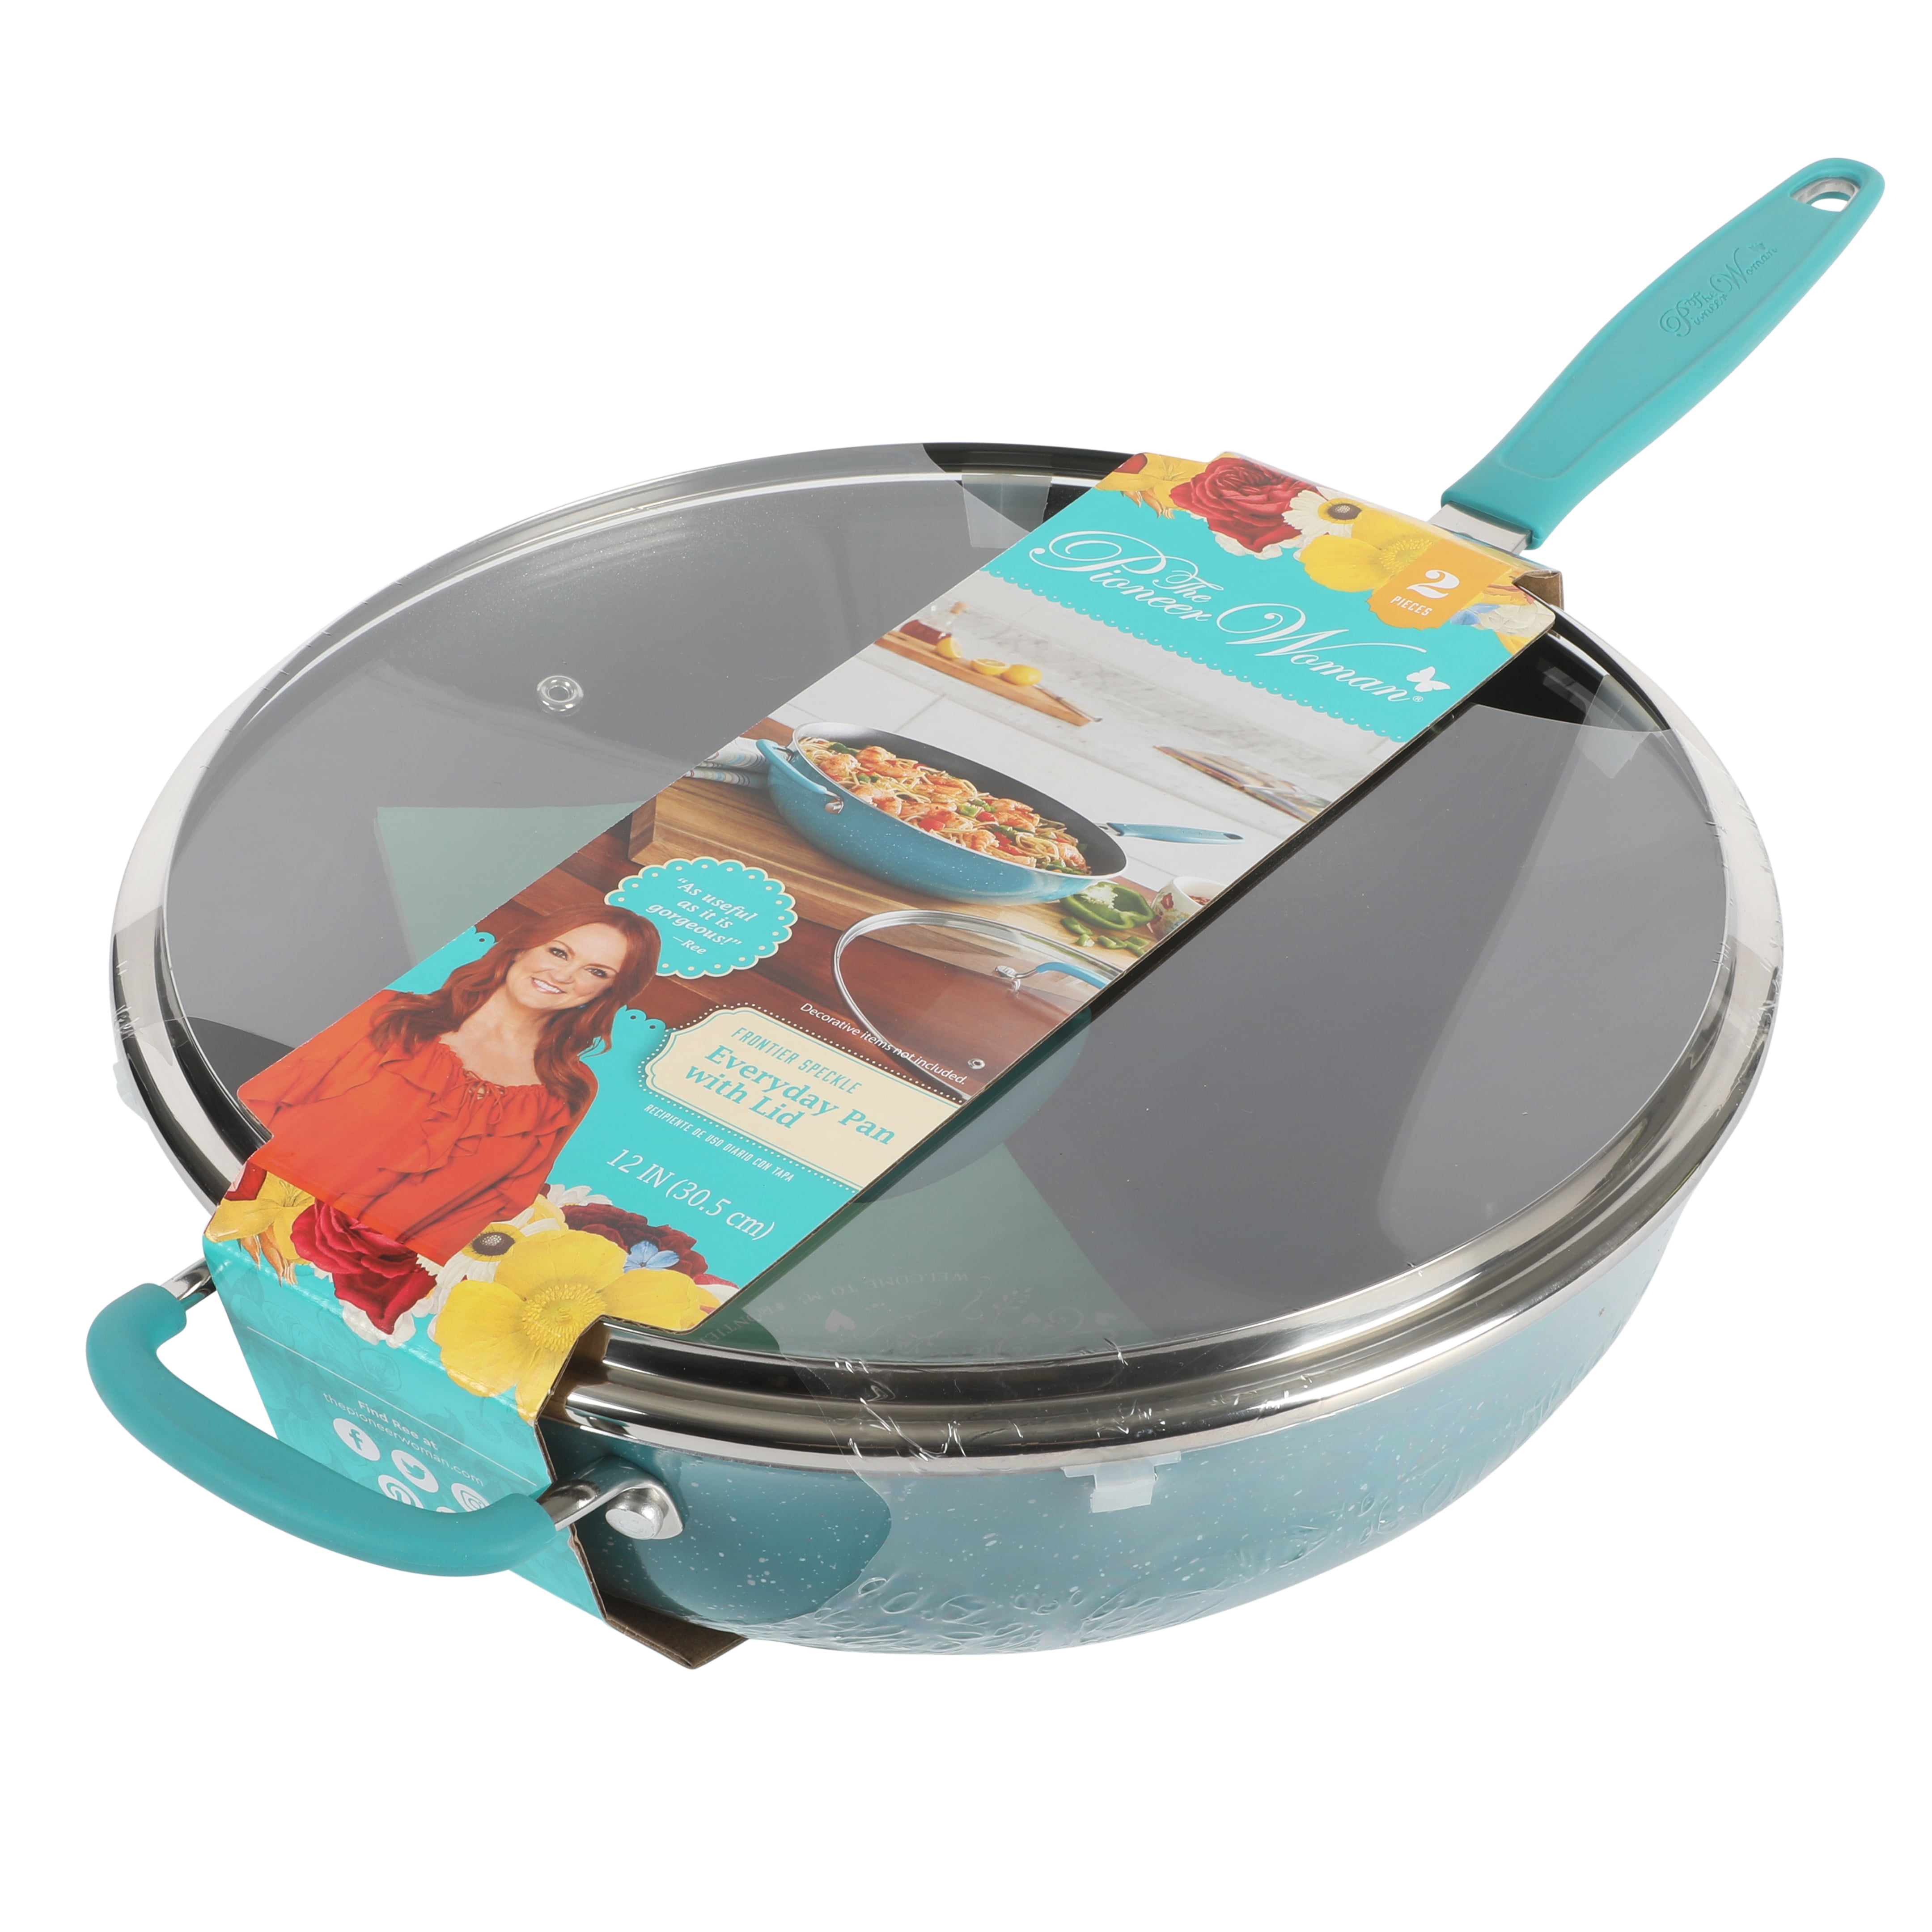 The Pioneer Woman Teal Speckle Timeless 13 x 18 Nonstick Aluminized Steel  Large Baking Sheet